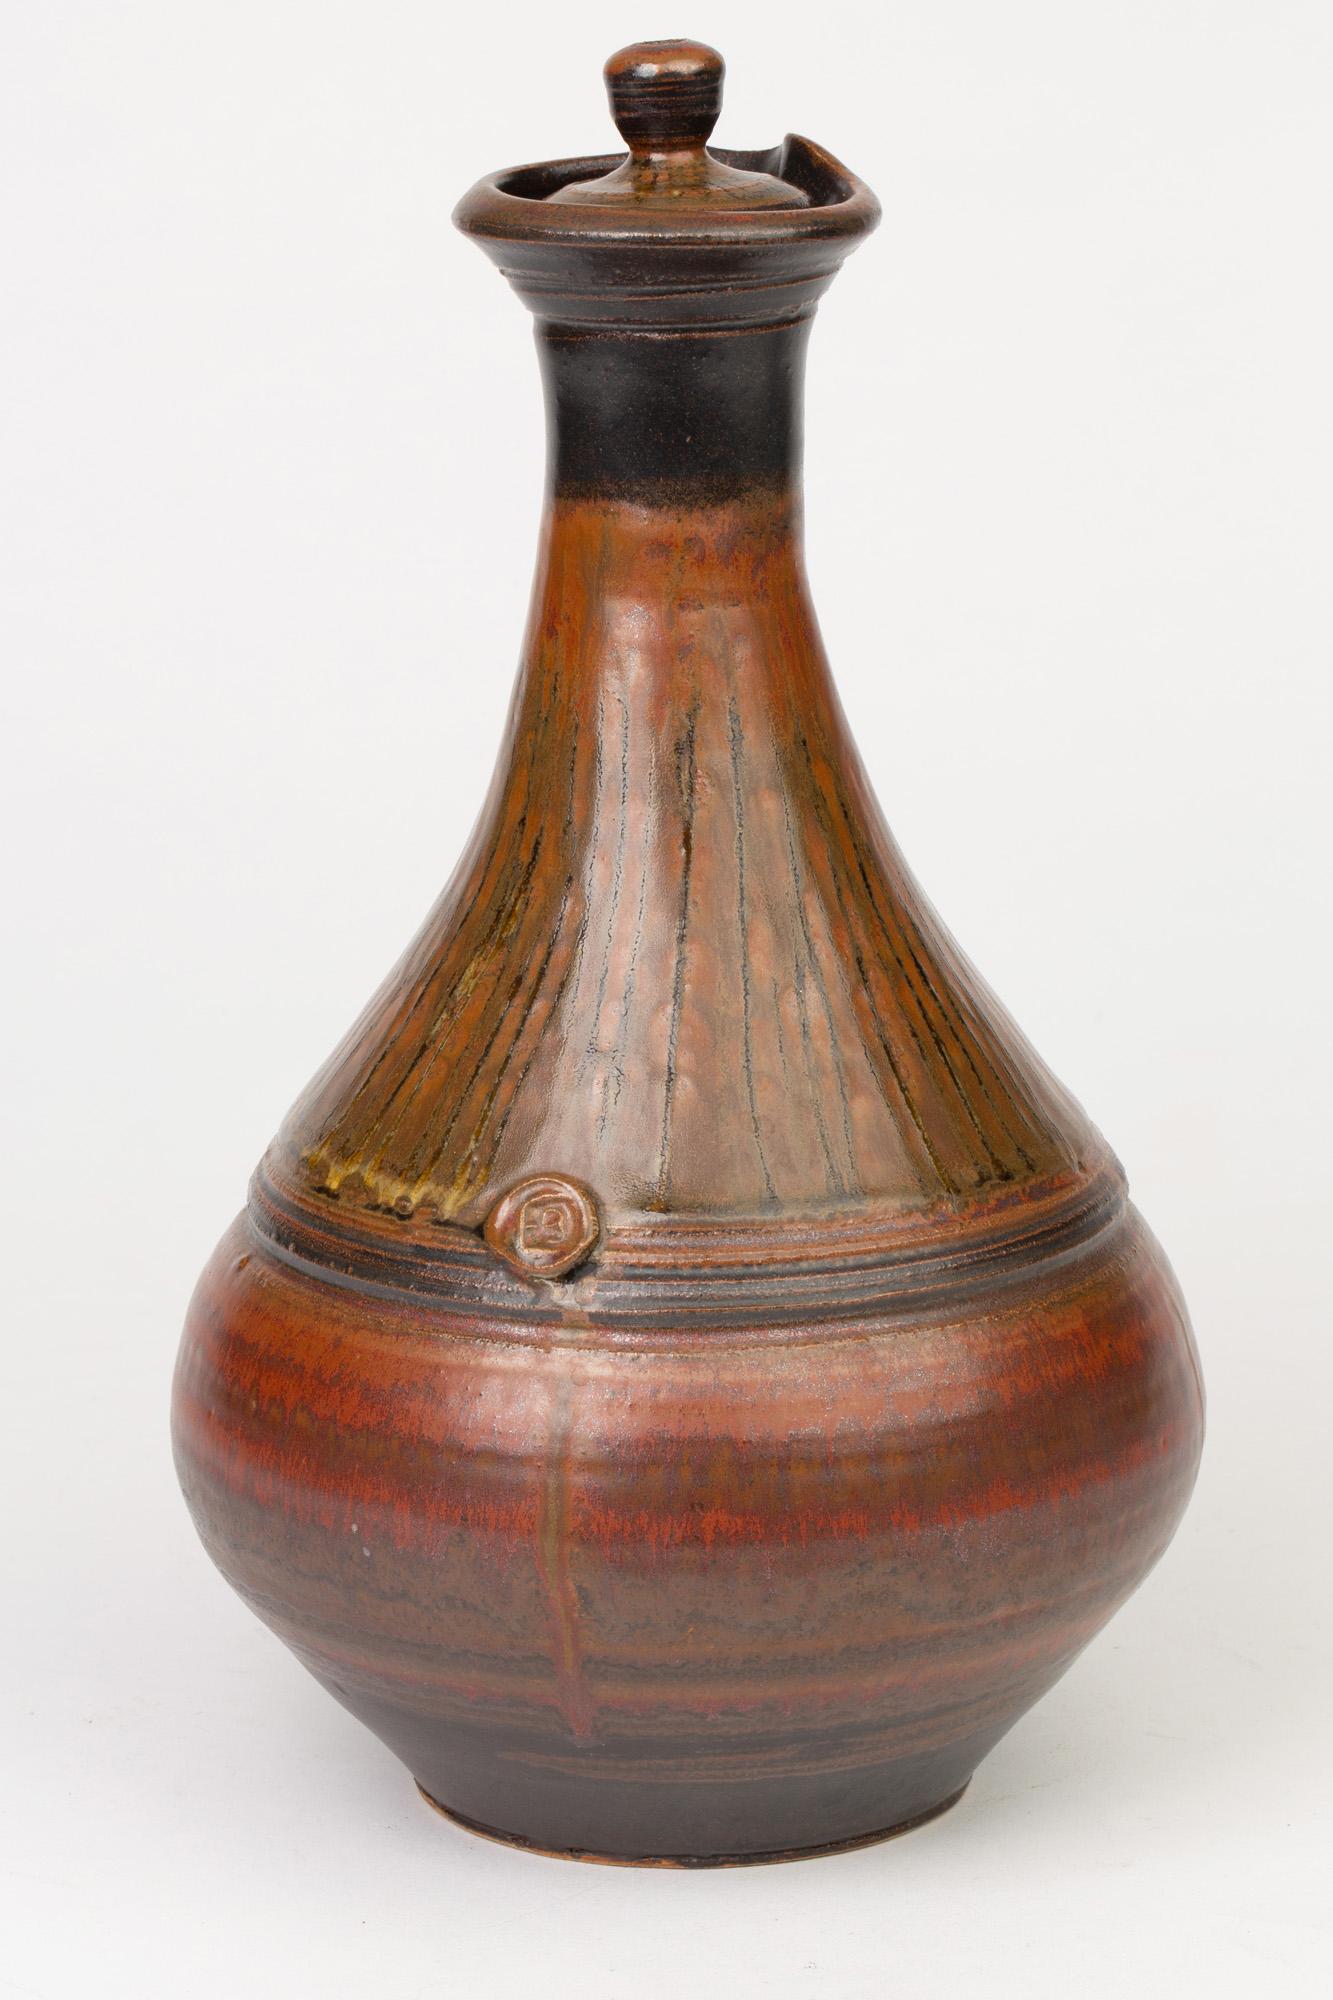 From a very large collection of 20th and 21st century Studio Pottery we offer this large and stylish Studio Pottery streak tenmoku colored glaze lidded ewer by Elsa Benattar and believed to date from the late 20th or early 21st century. This finely